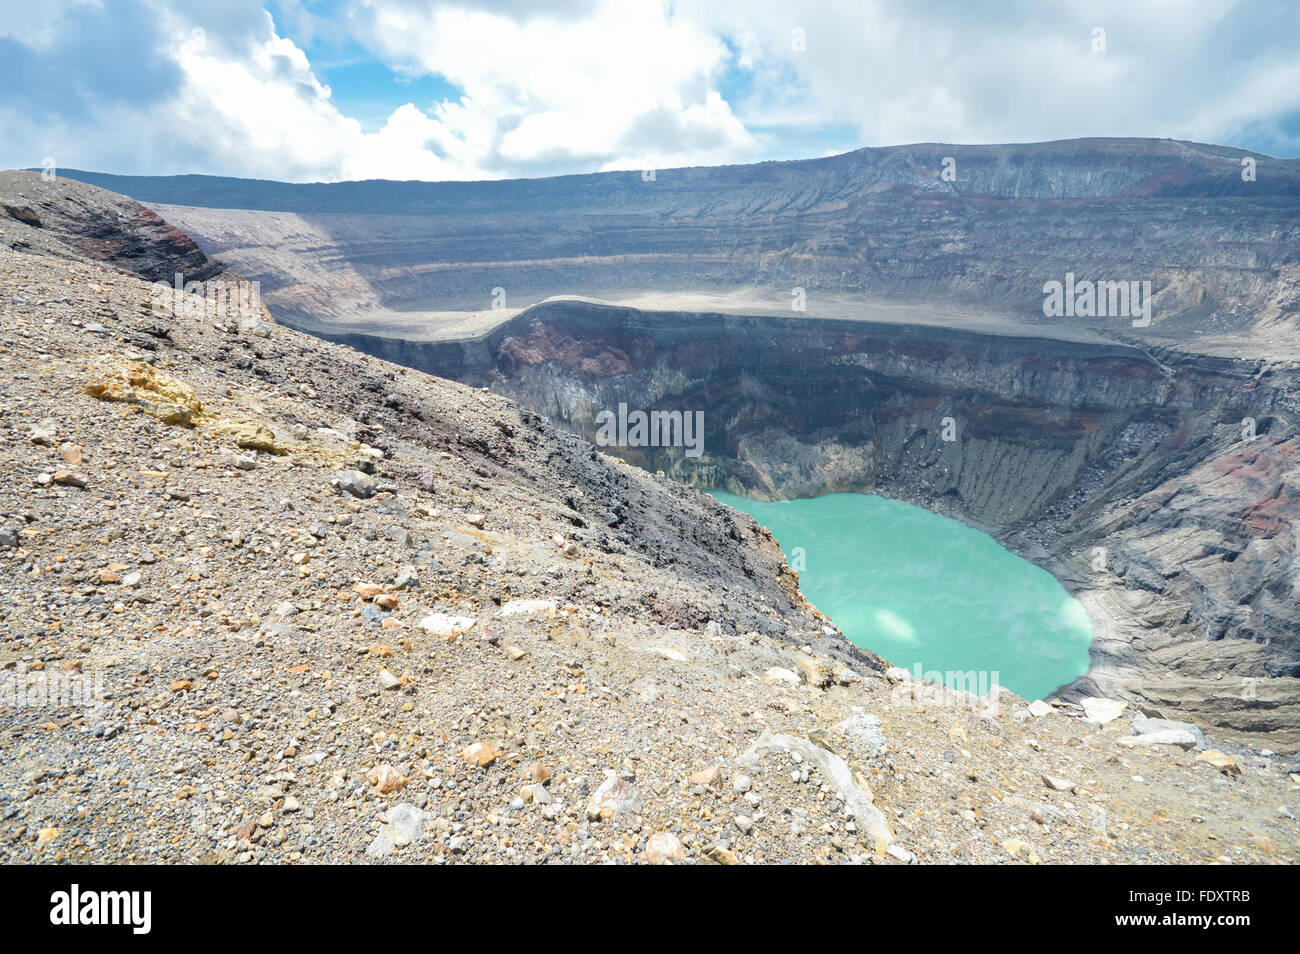 The crater lake of the Santa Ana Volcano, hot and bubbling from the volcanic activity, El Salvador Stock Photo